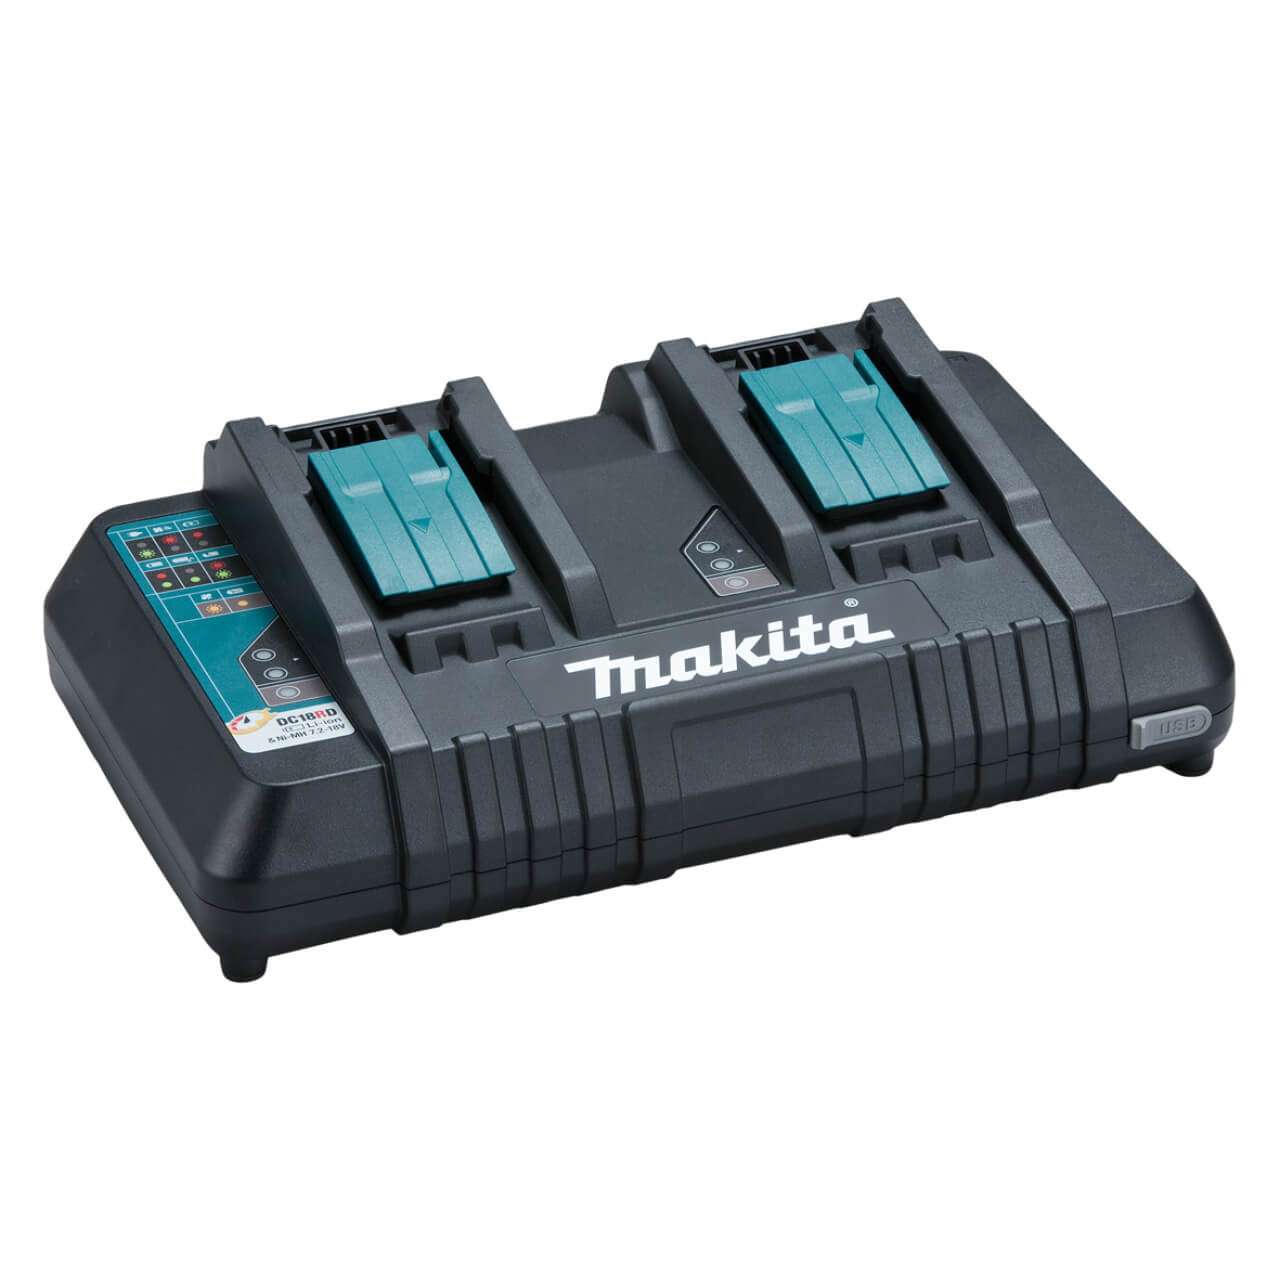 Makita 18Vx2 BRUSHLESS 165mm Plunge Saw Kit - Includes 2 x 5.0Ah Batteries. Dual Port Rapid Charger & 2 x MakPac Case